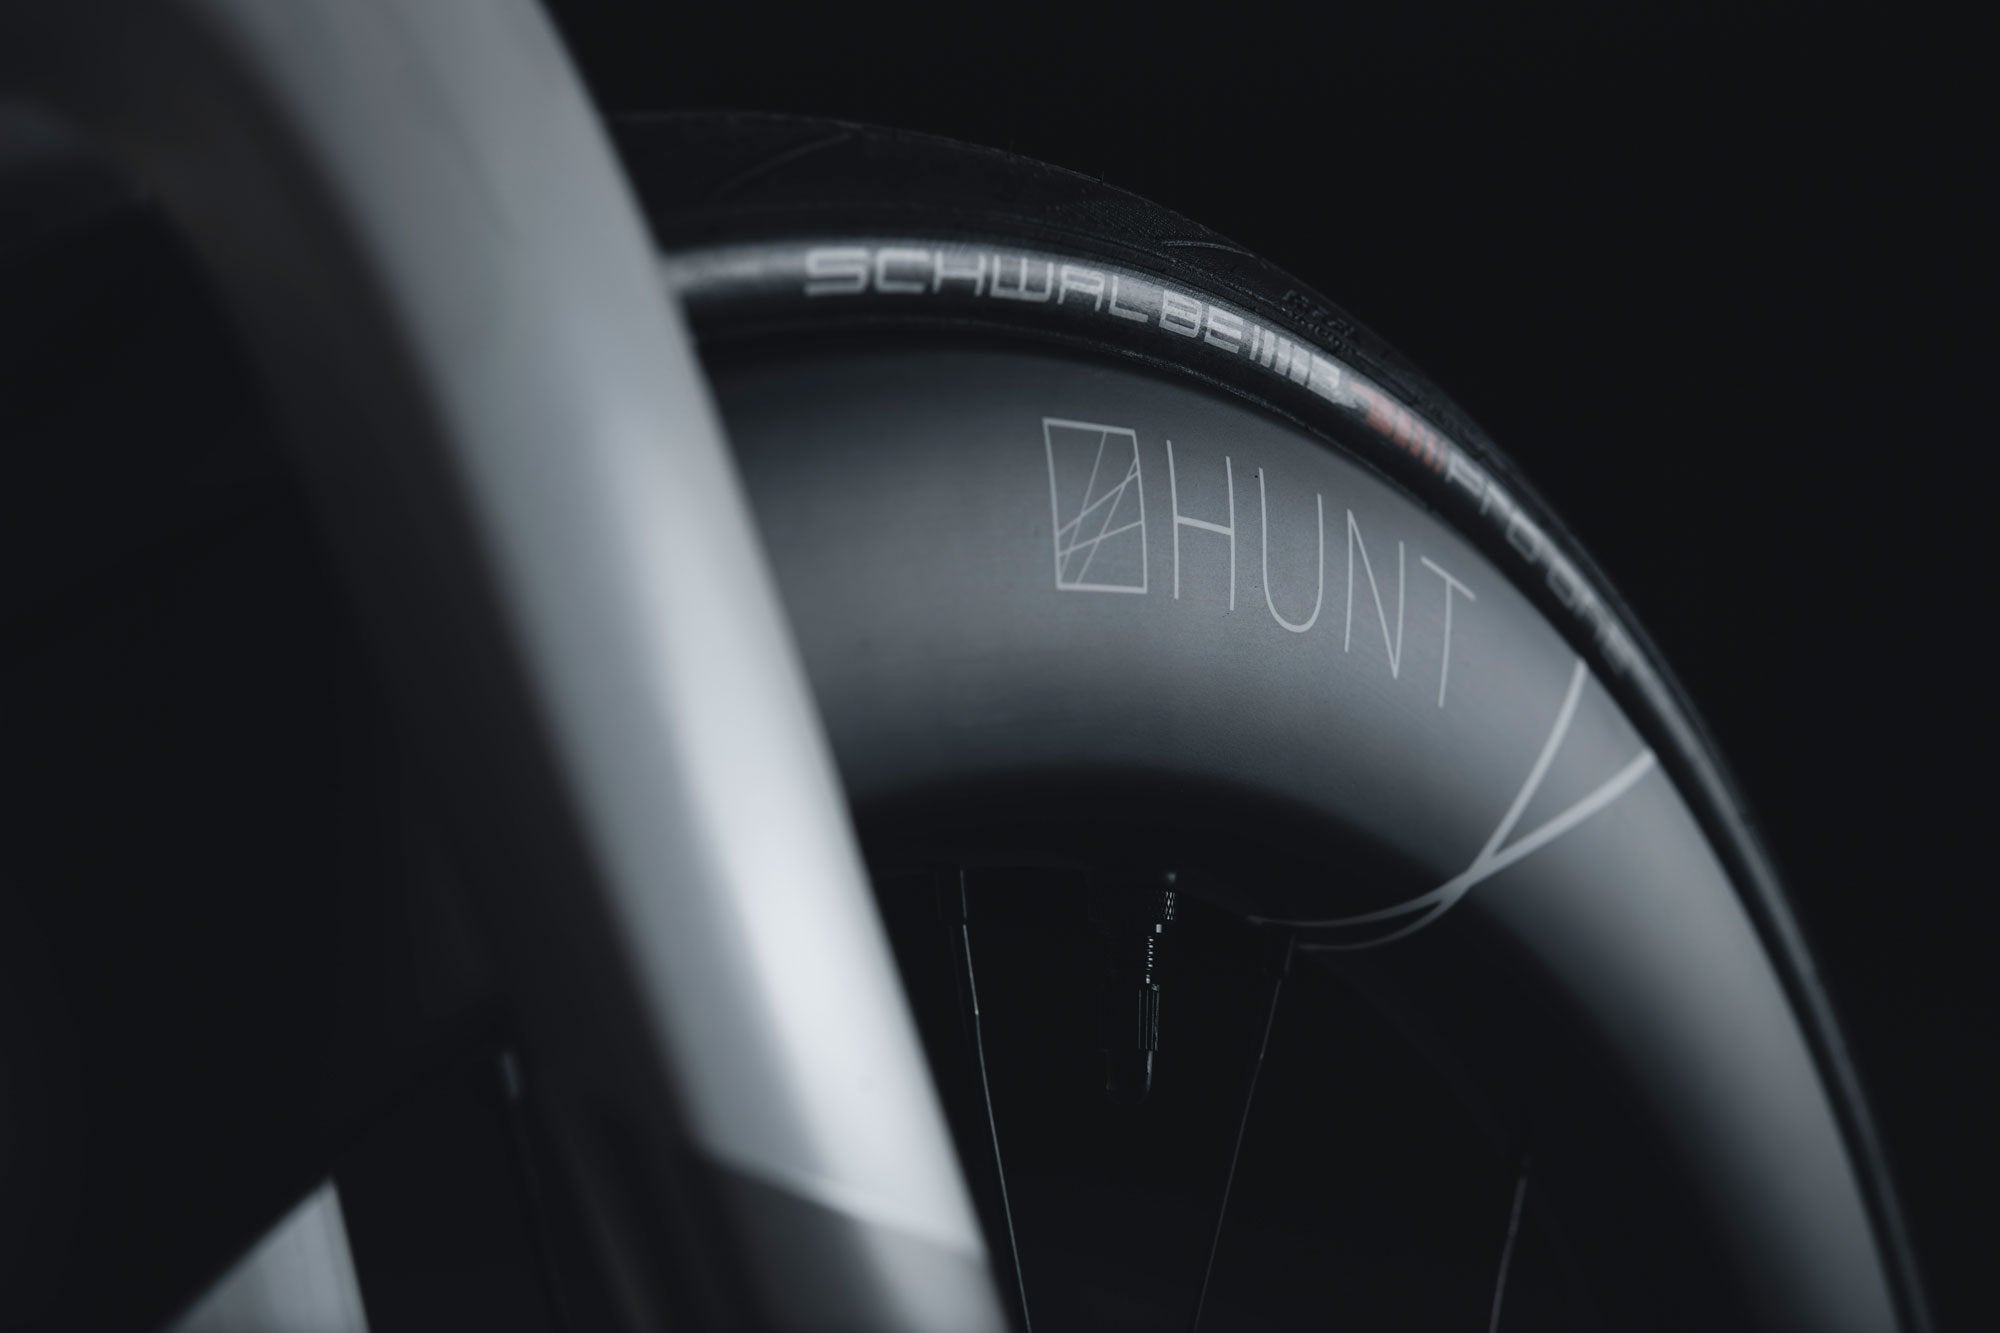 <h1>TYRE COMPATIBILITY</h1><i>Optimised aerodynamically for a Schwalbe Pro One 25-28c, but compatible with any tubeless or clincher tyre from 23 up to 45c.</i>